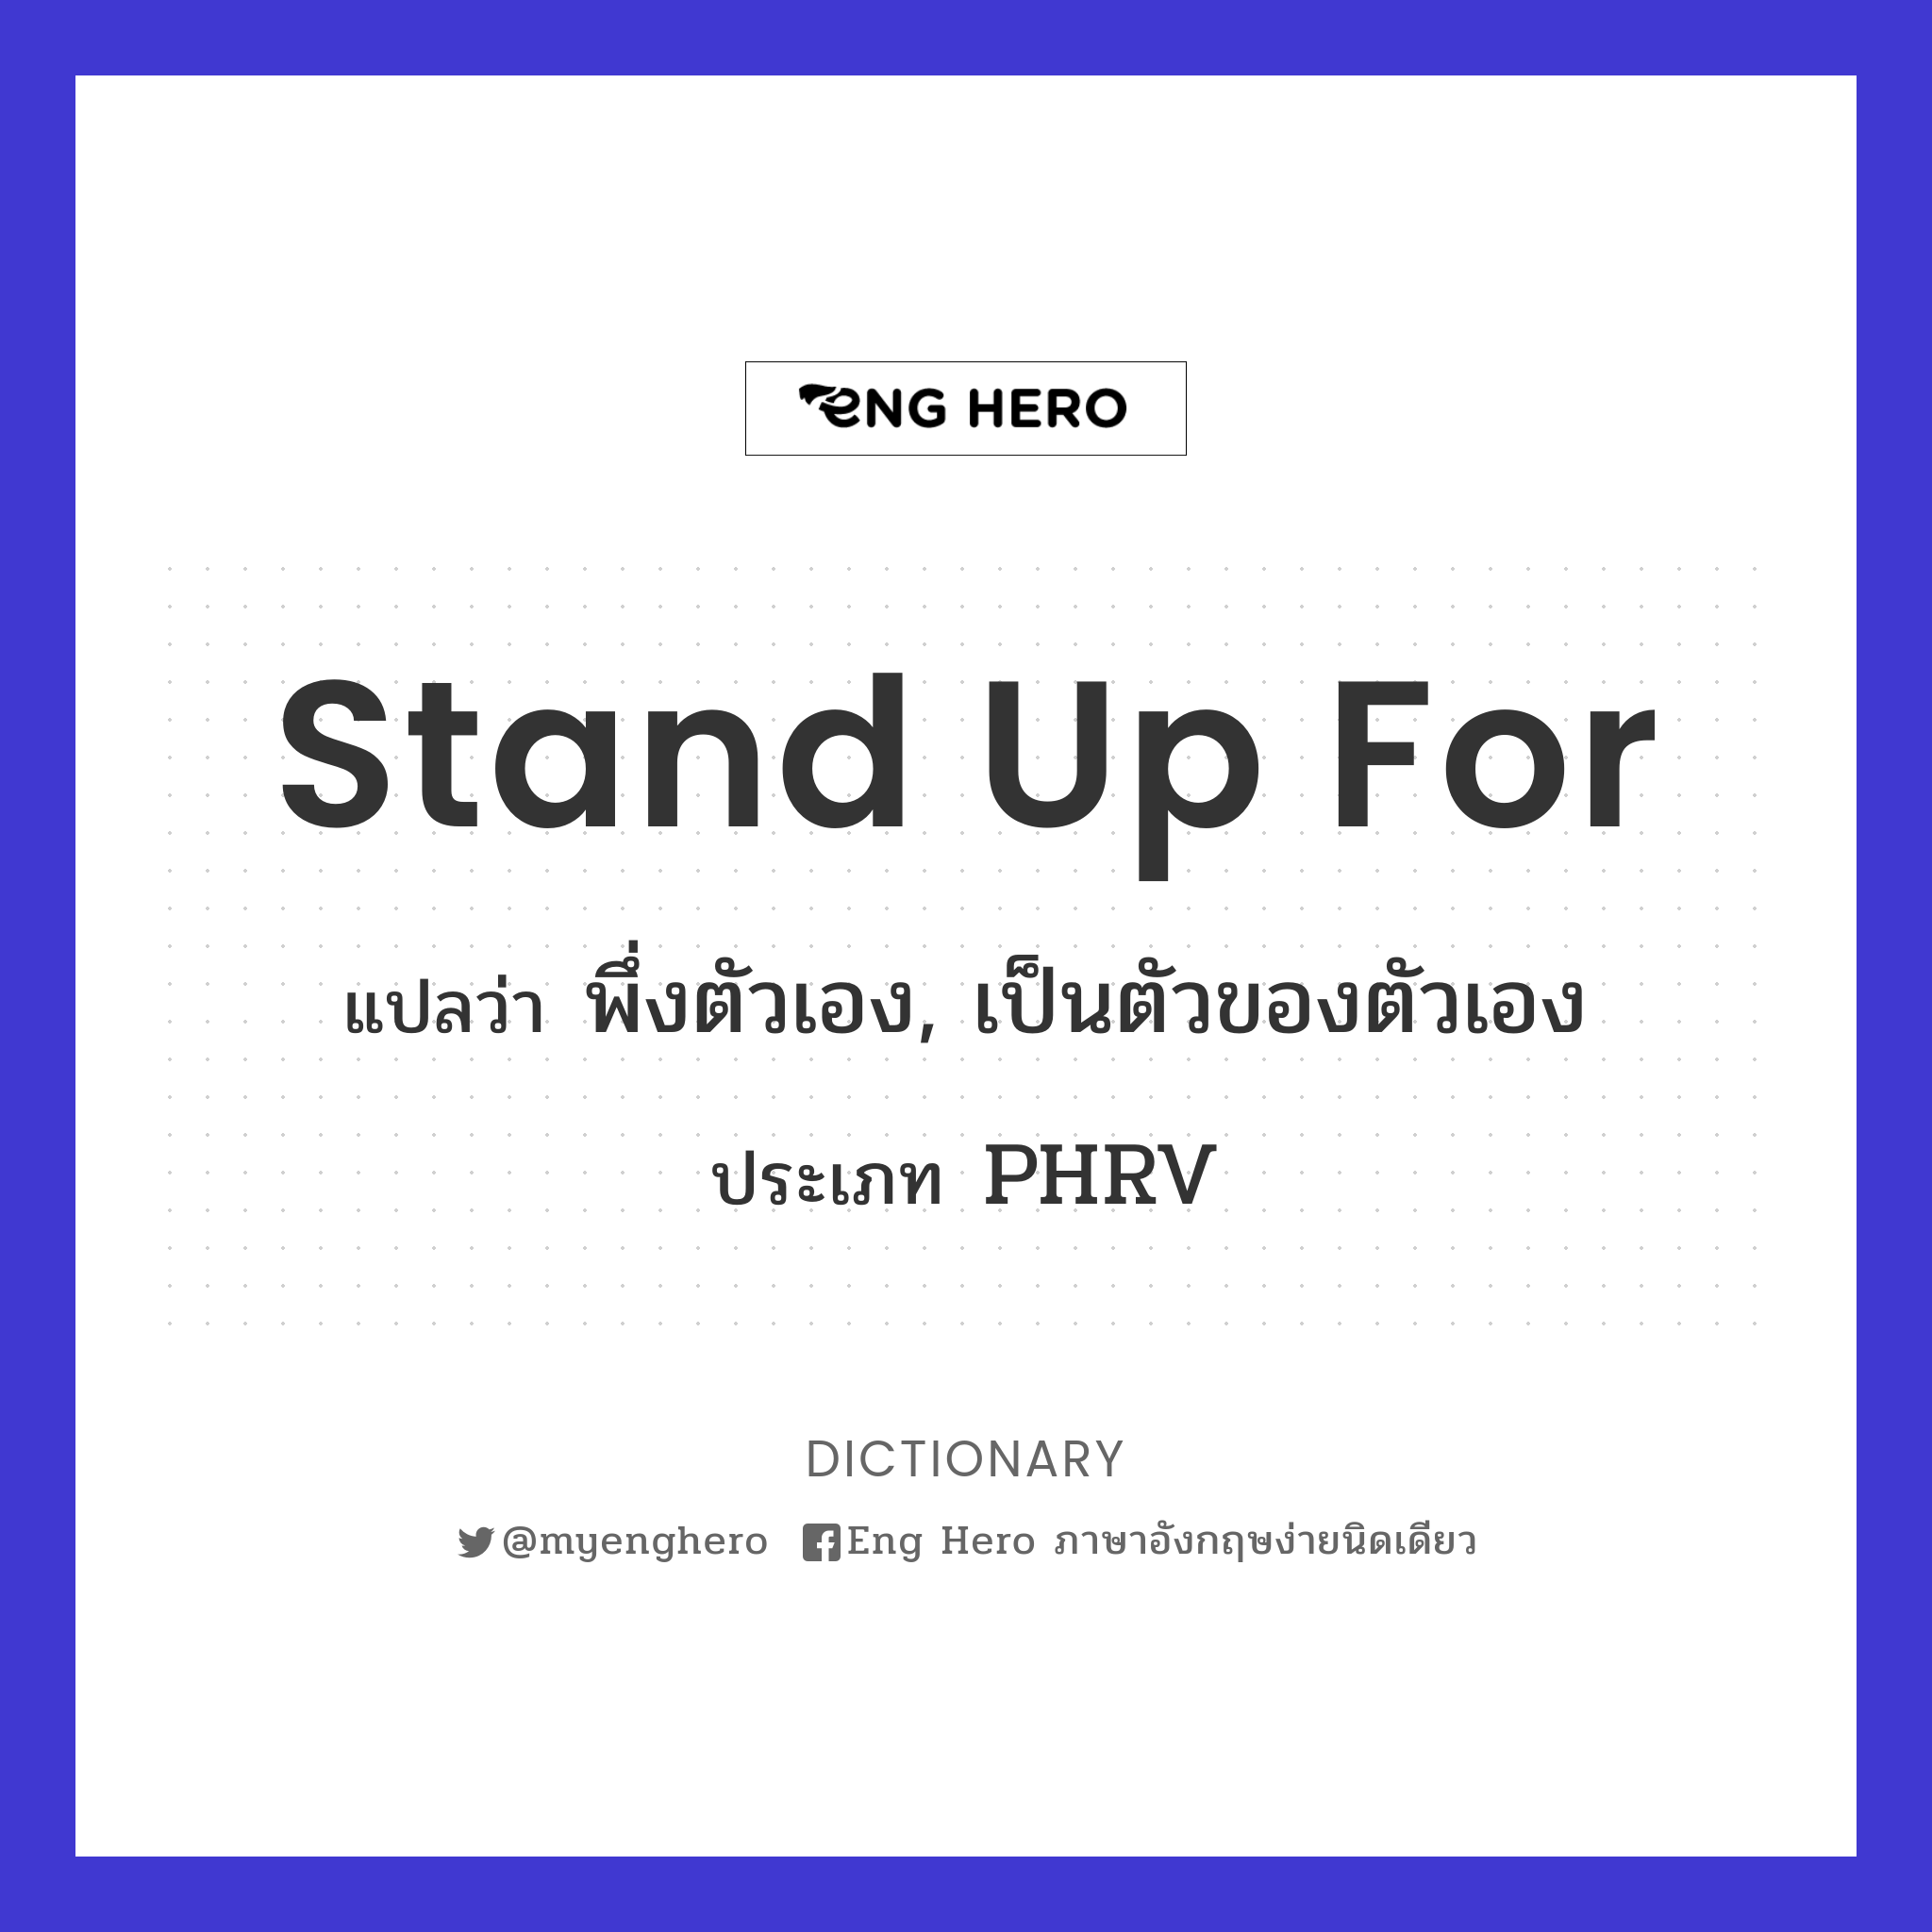 stand up for